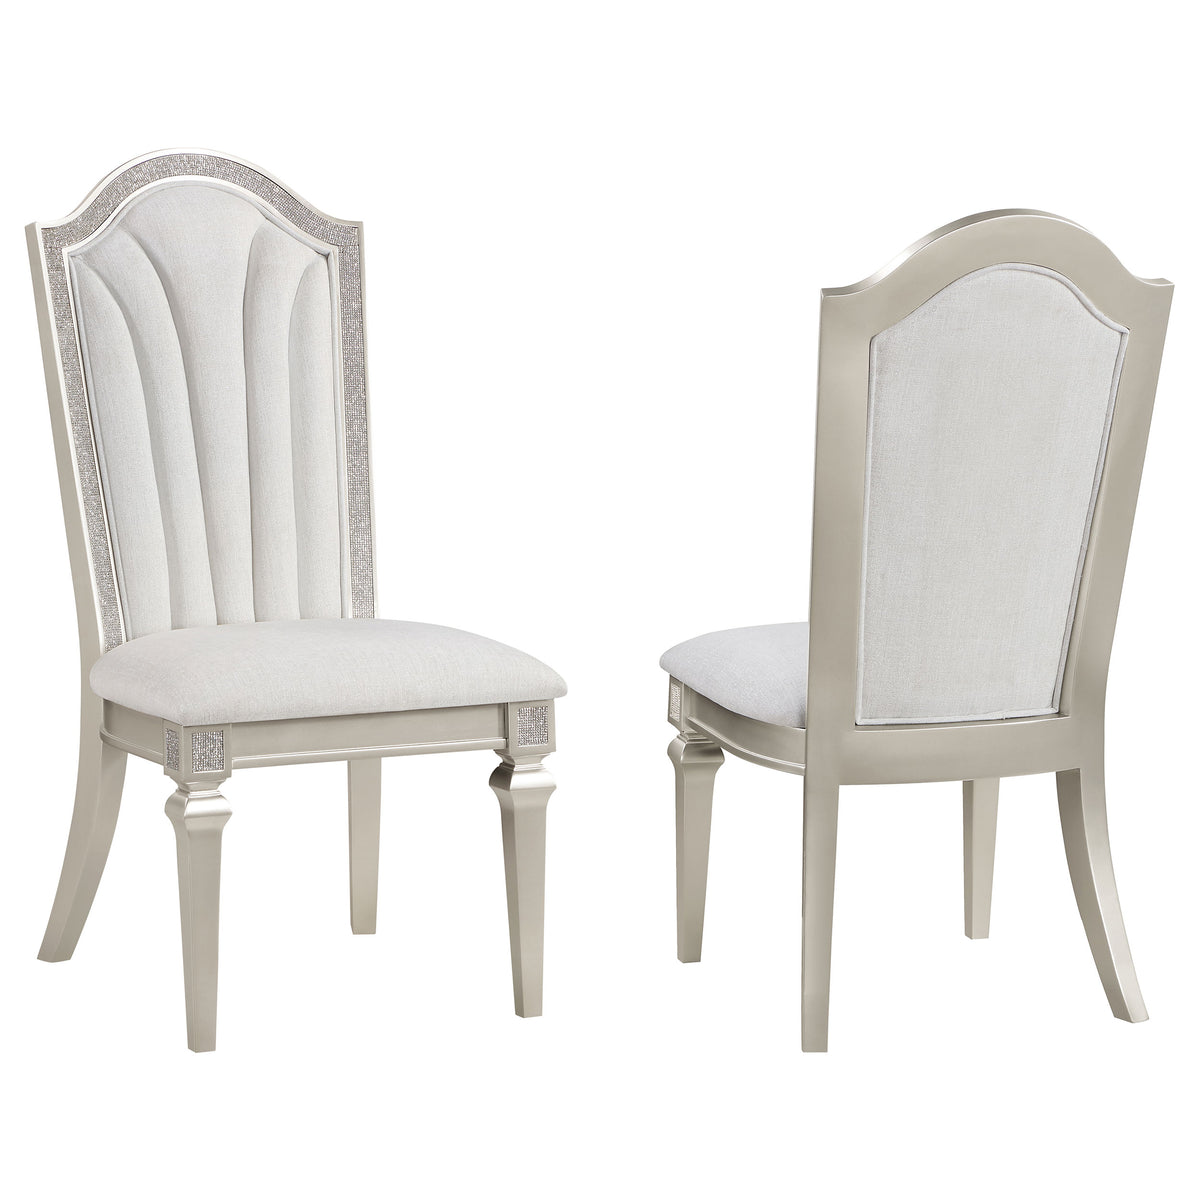 Evangeline Upholstered Dining Side Chair with Faux Diamond Trim Ivory and Silver Oak (Set of 2)  Las Vegas Furniture Stores